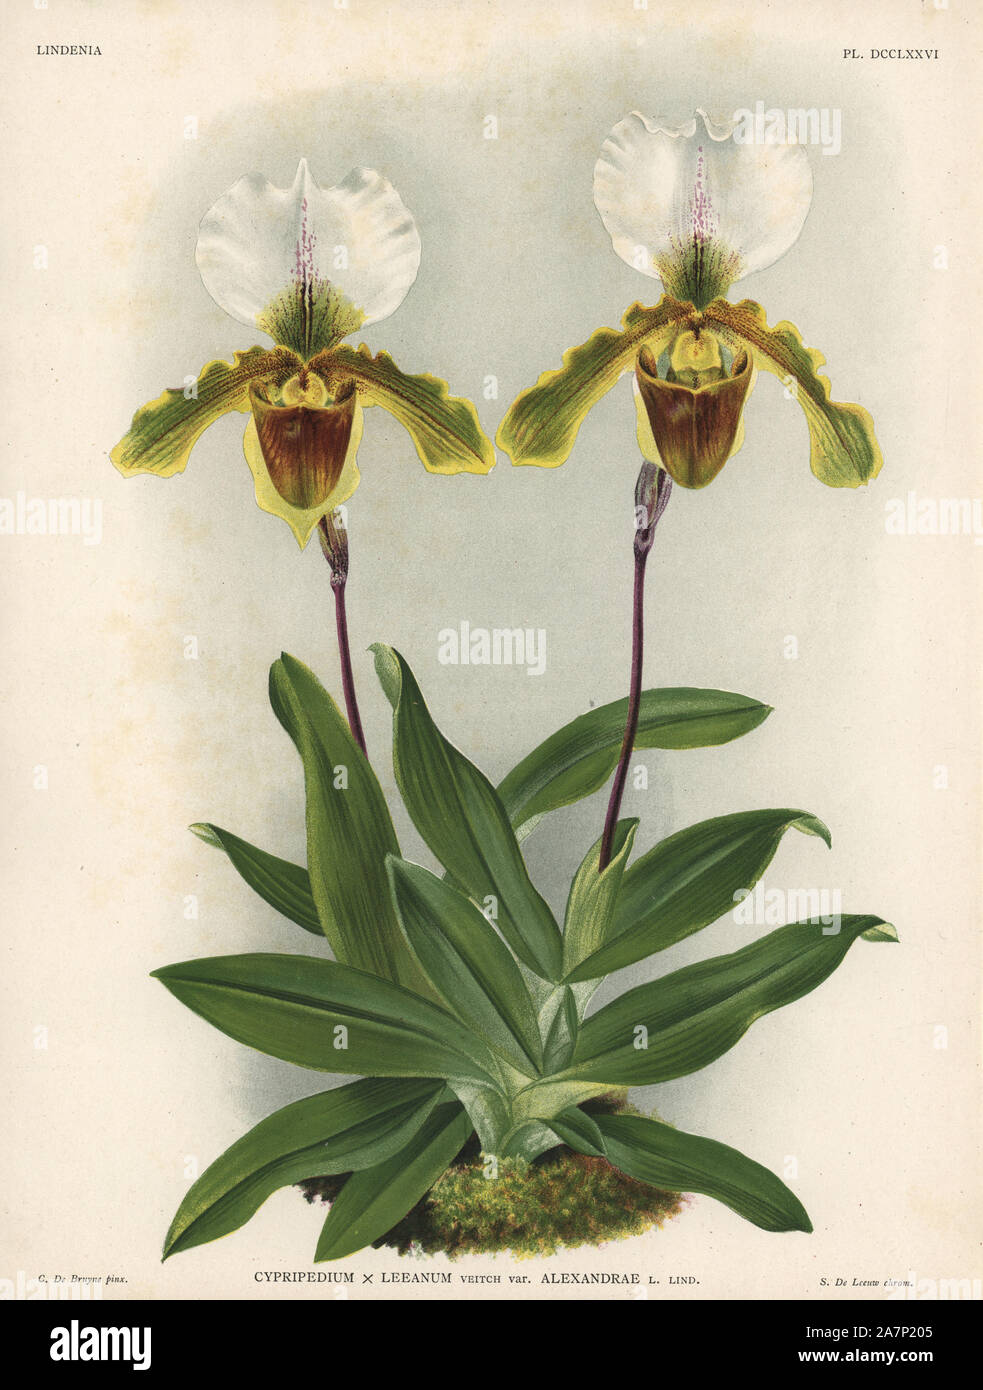 Alexandrae variety of Cypripedium x Leeanum, Veitch, hybrid orchid. Illustration drawn by C. de Bruyne and chromolithographed by S. de Leeuw from Lucien Linden's 'Lindenia, Iconographie des Orchidees,' Brussels, 1902. Stock Photo